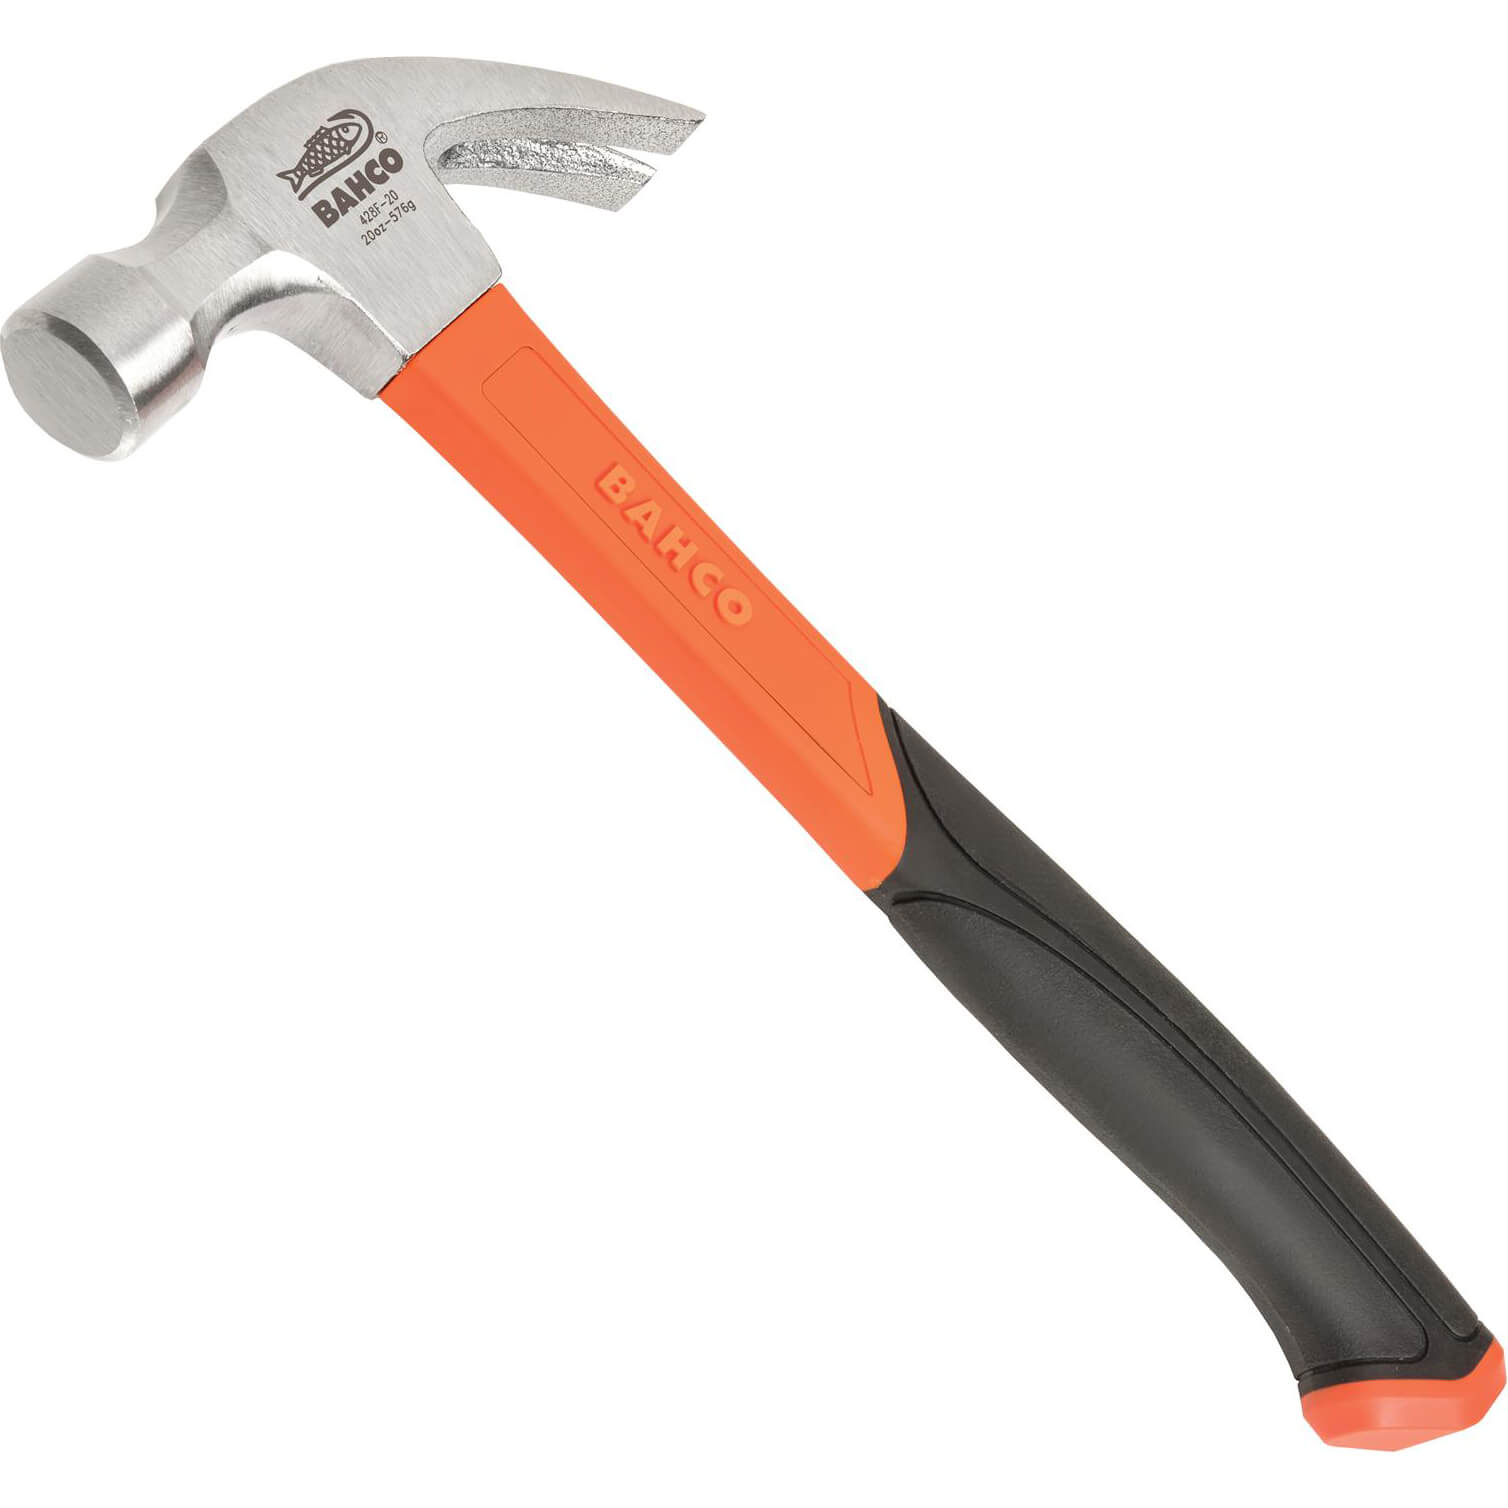 Photo of Bahco 428 Curved Fibreglass Claw Hammer 570g